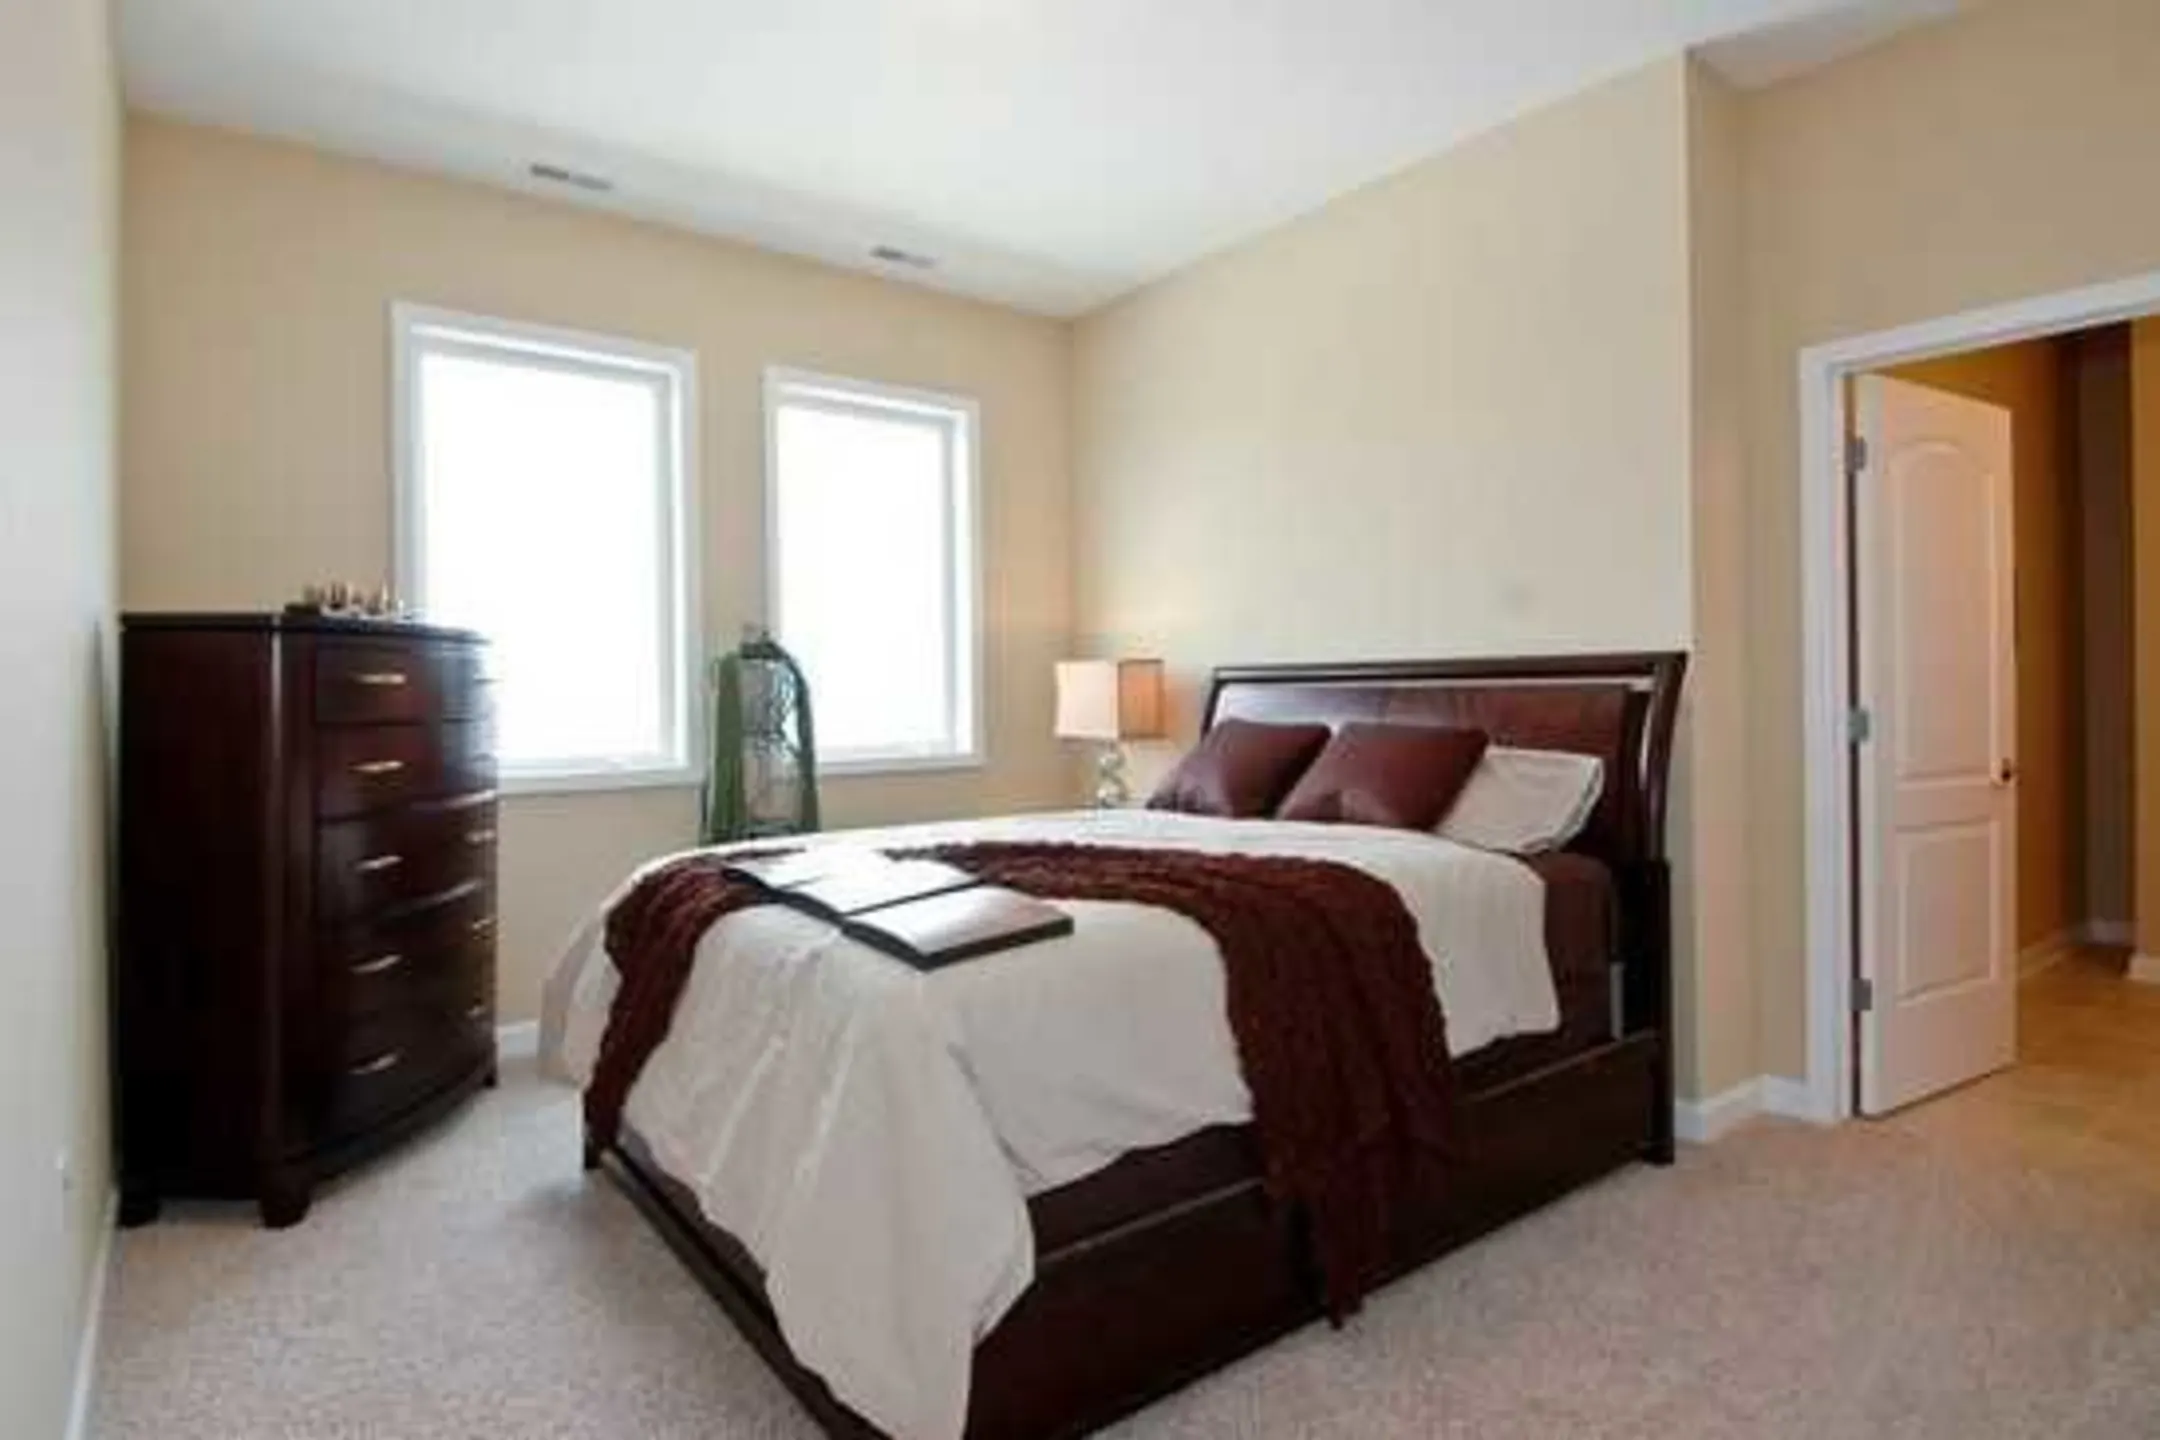 Bedroom - River Place Luxury Residences - McHenry, IL